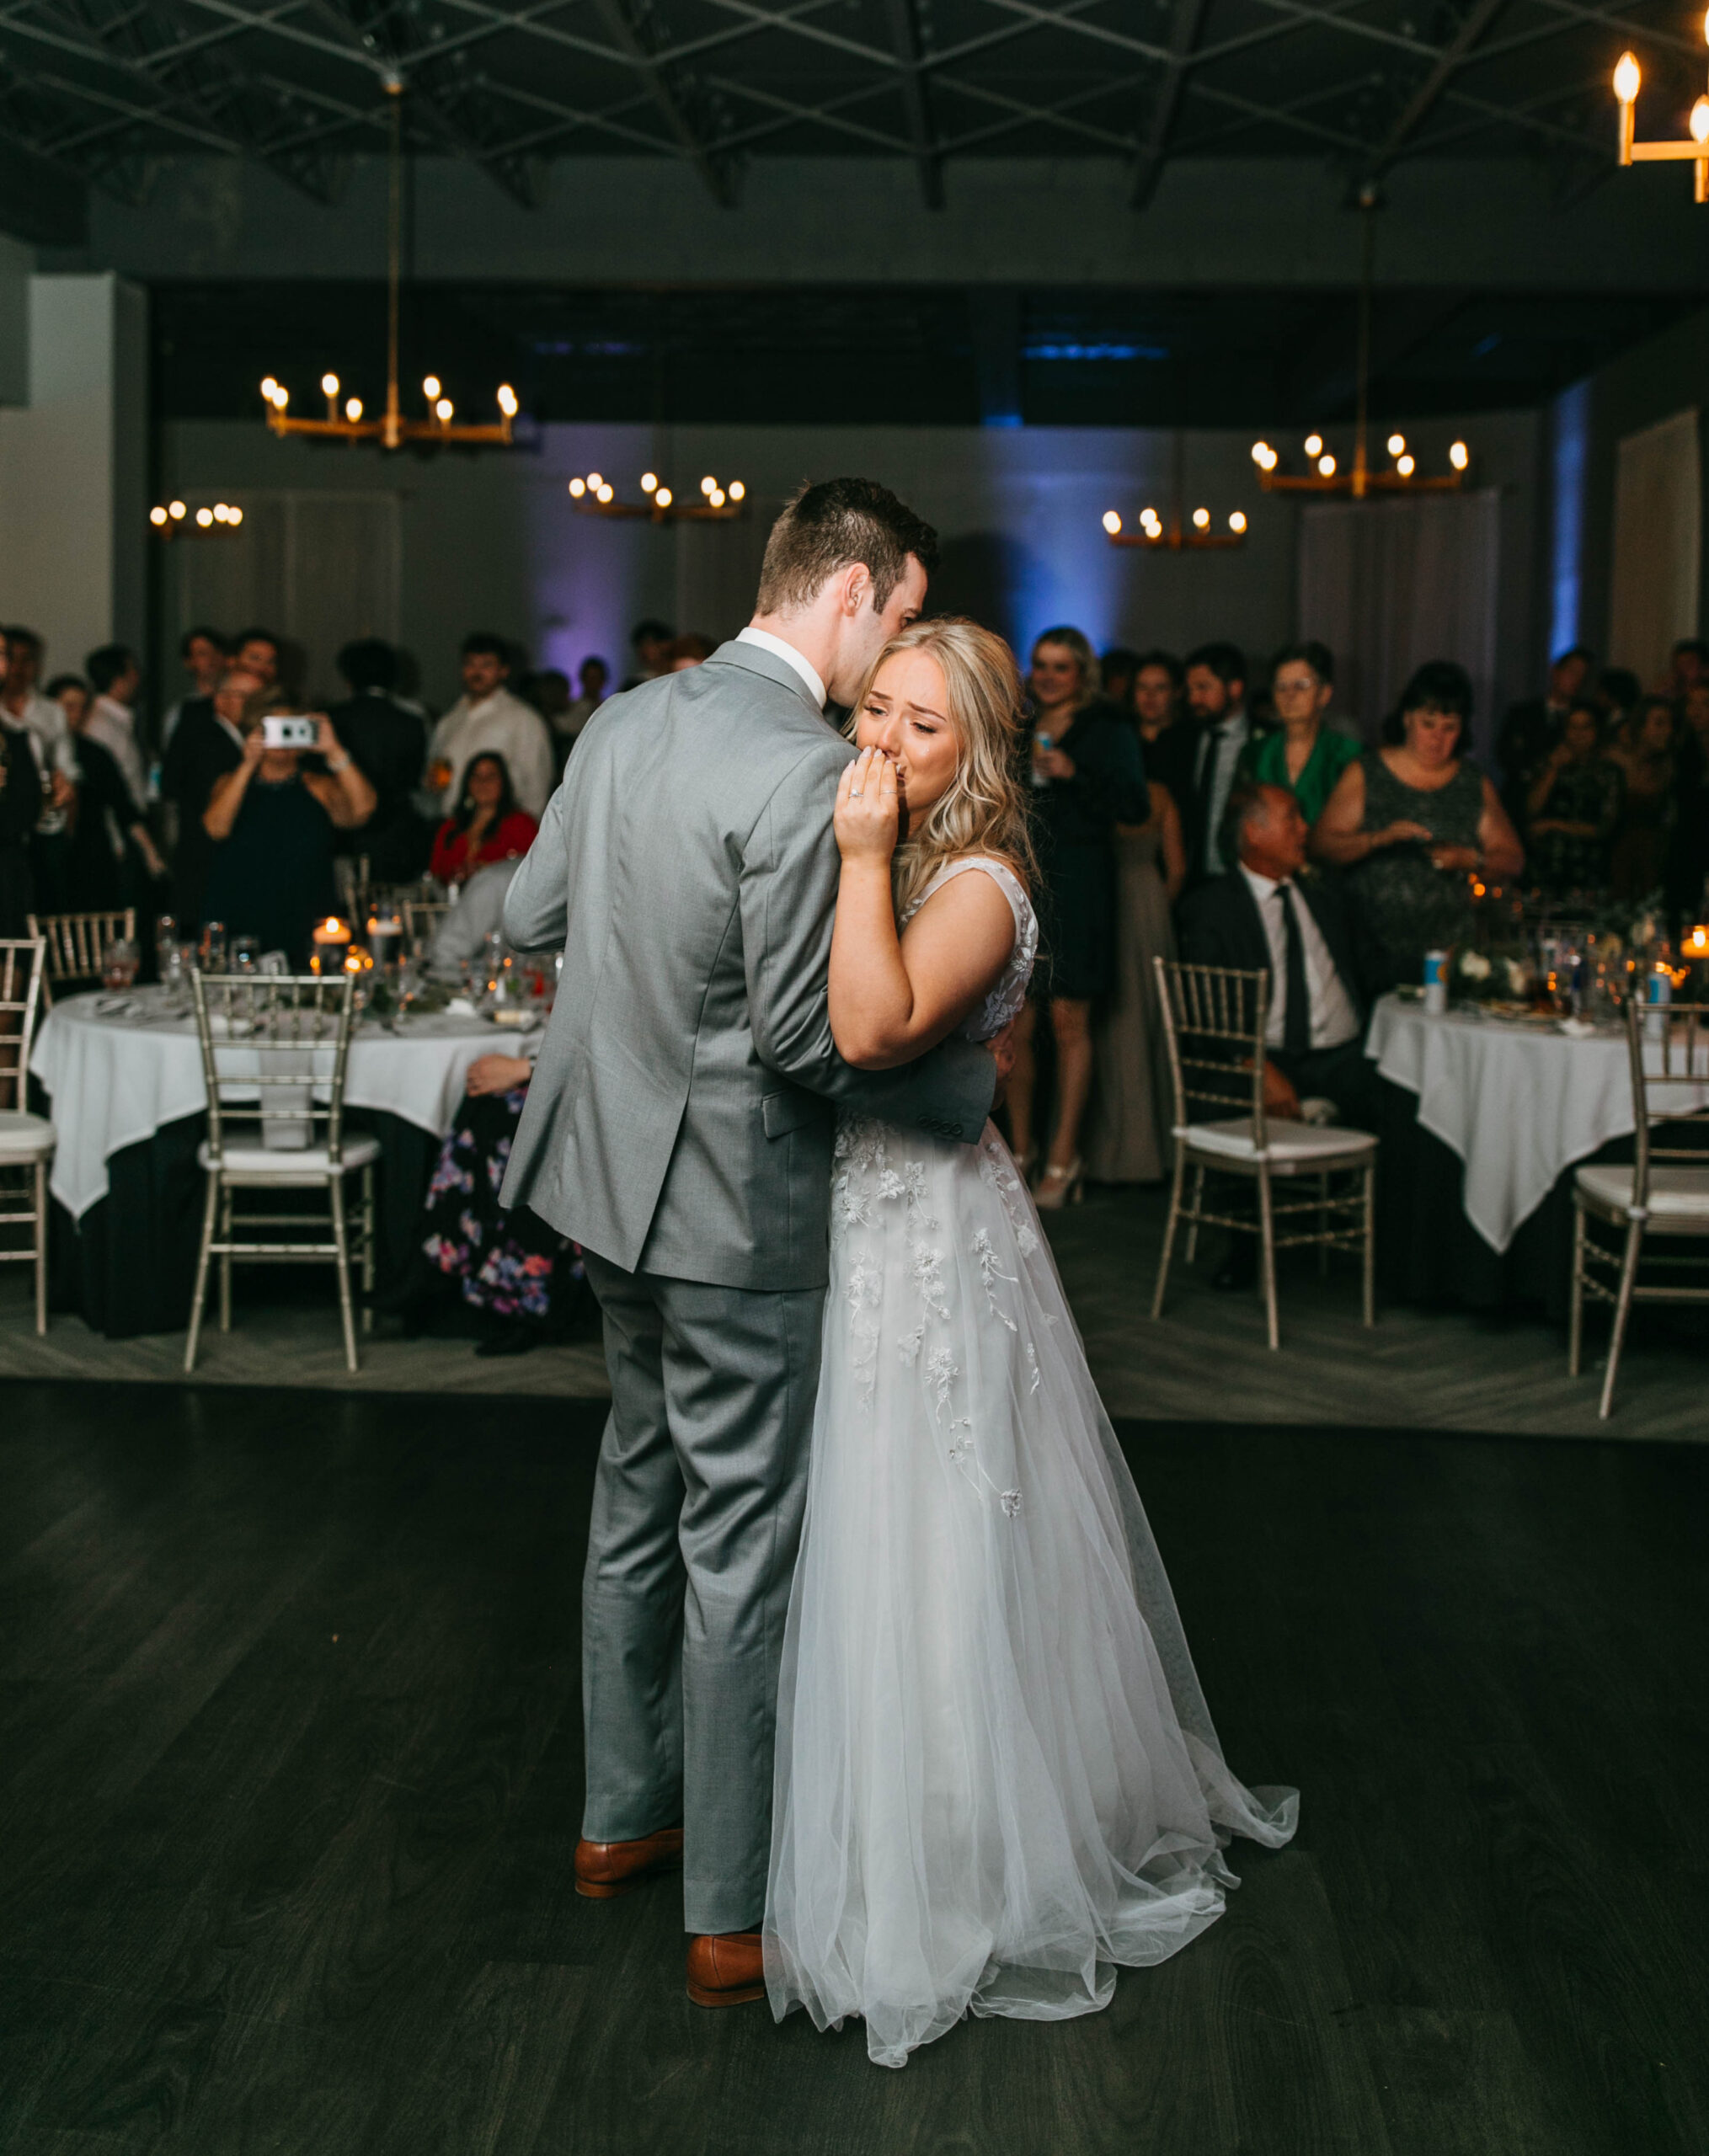 A wedding couple sharing their first dance together at Hotel Covington.